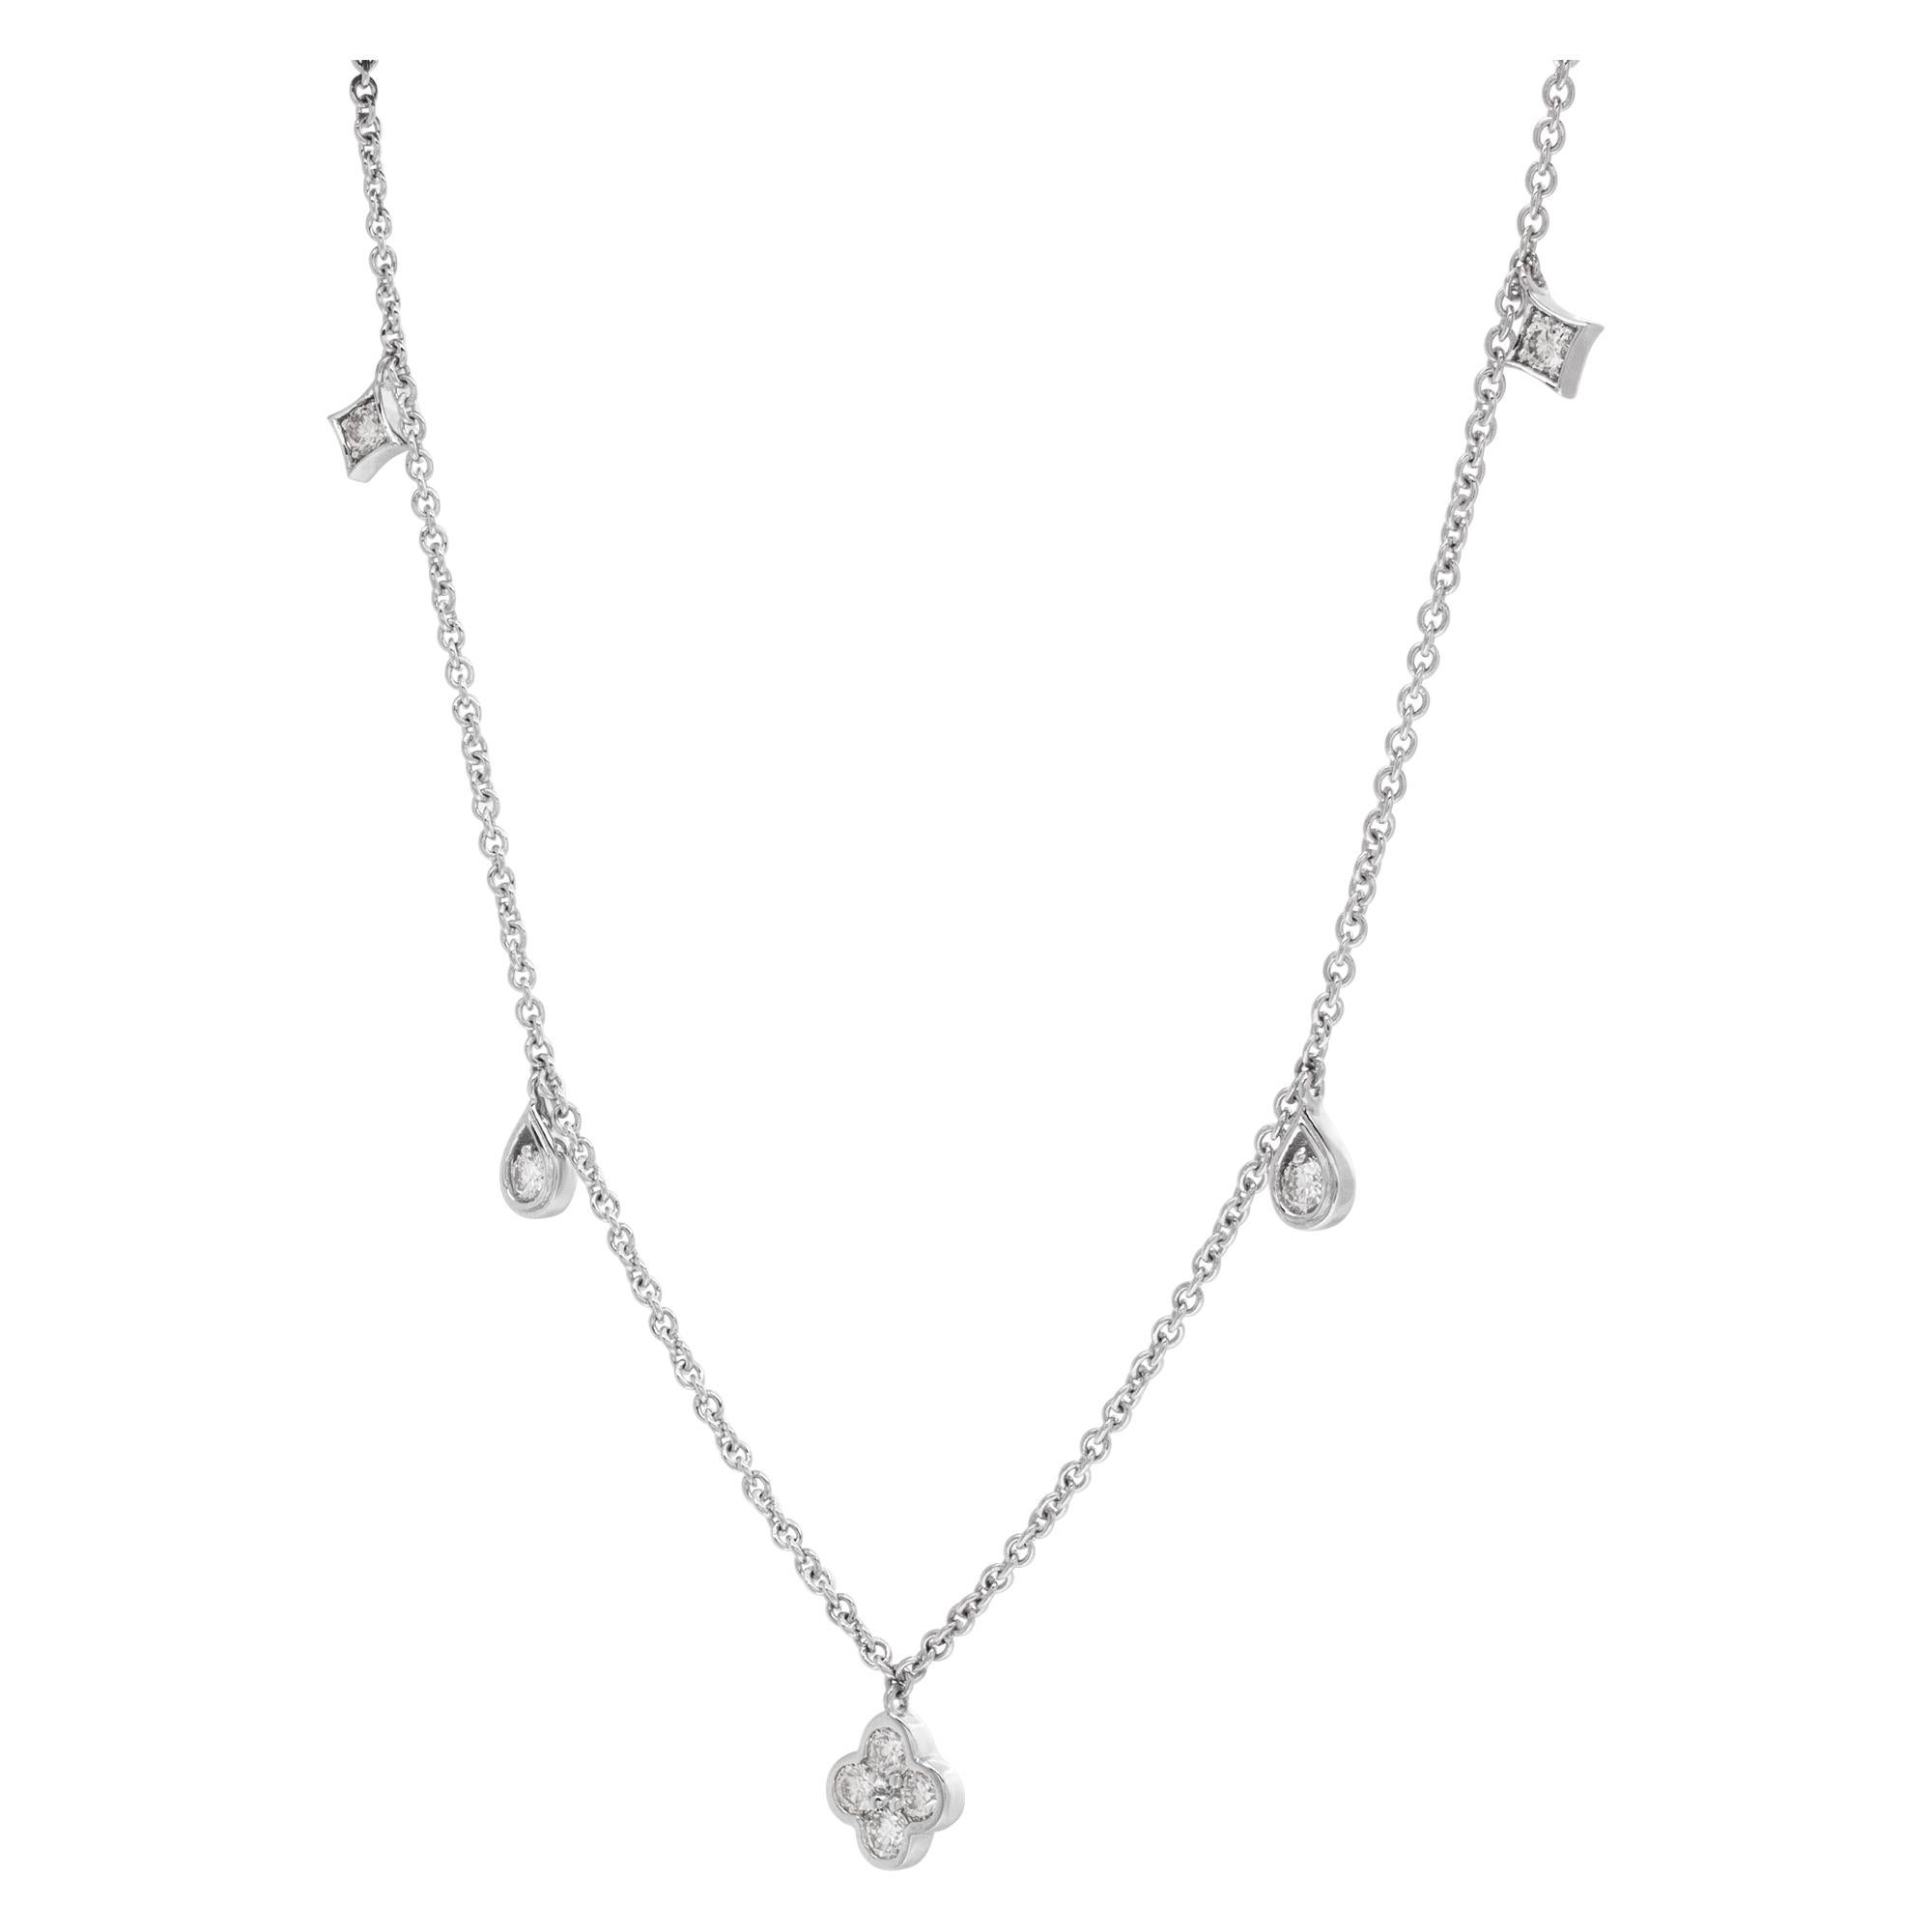 Women's Chain Necklace in 18k White Gold 